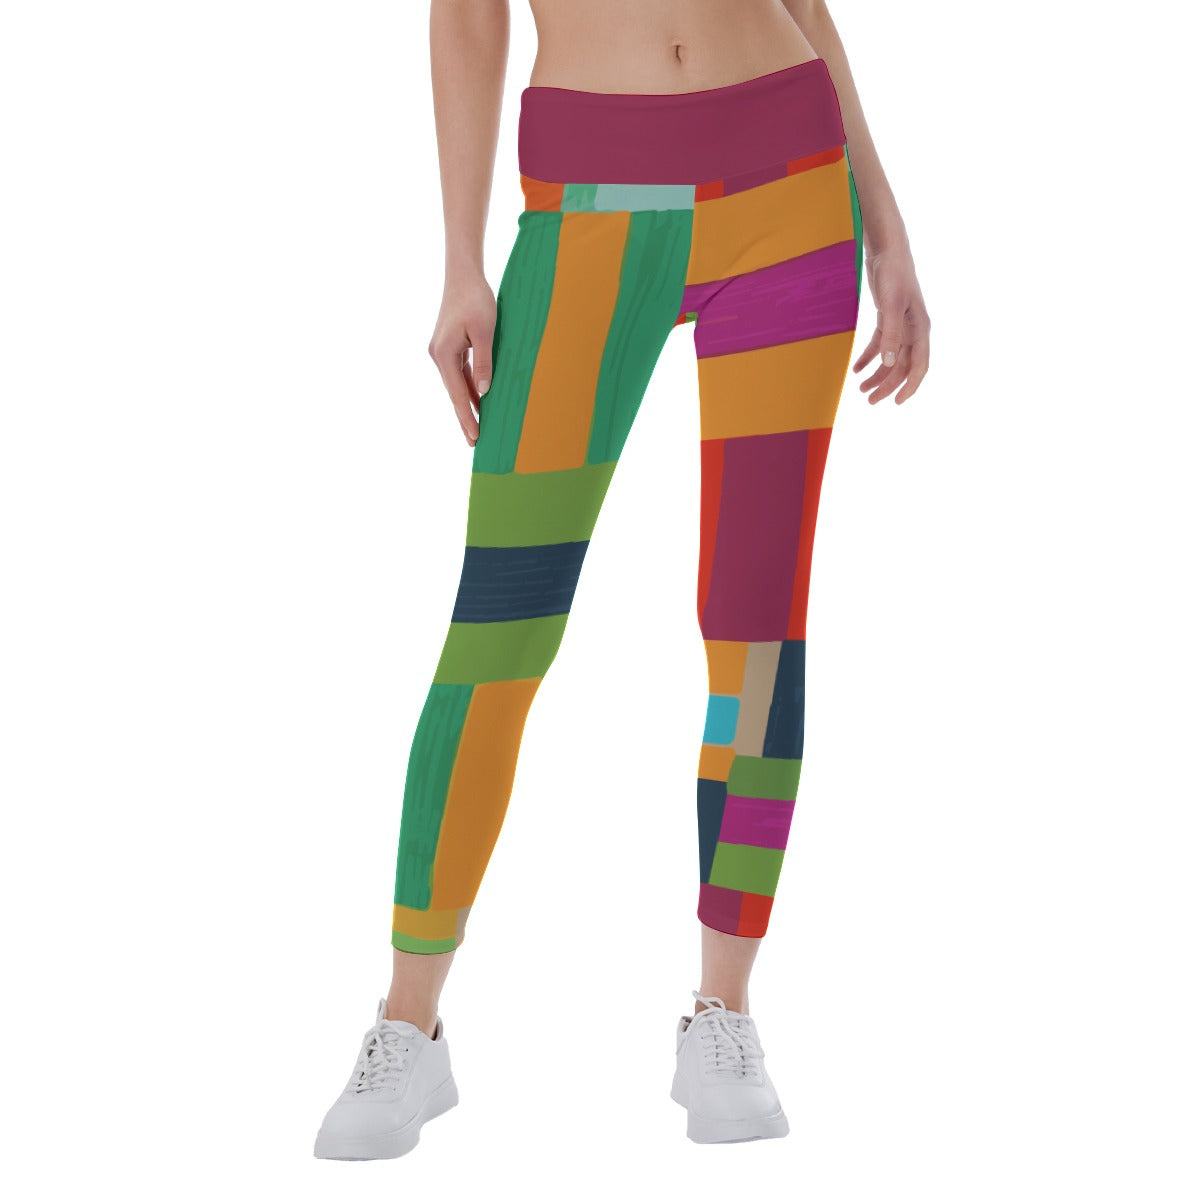 Colorful Yoga Leggings - Yoga Pants for Teen Yoga and Meditation Supplies  in the US - Personal Hour